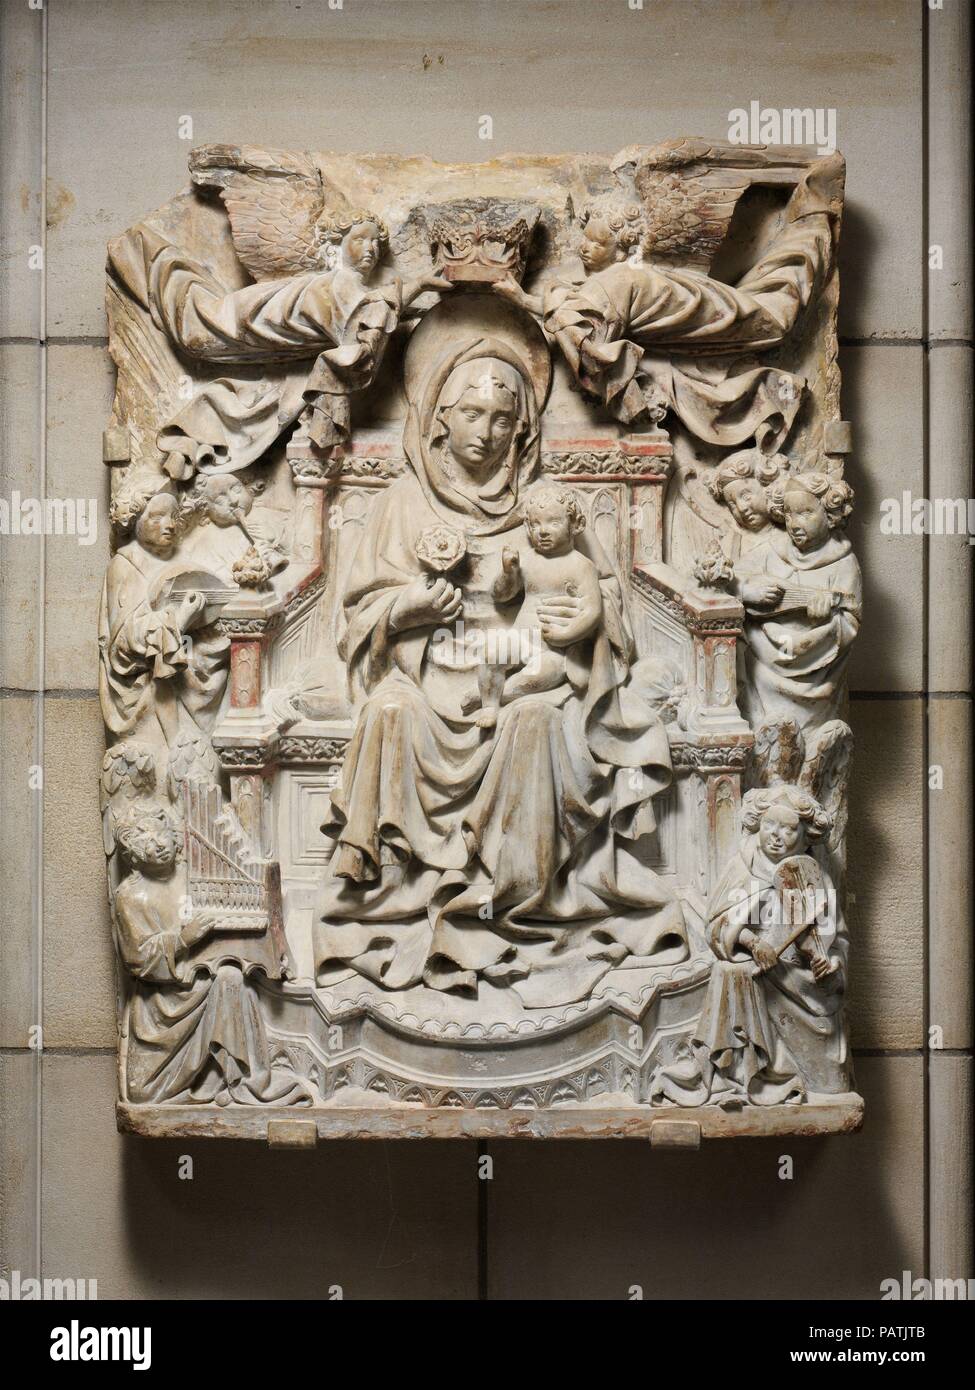 Relief with Enthroned Virgin and Child surrounded by Angels. Culture: North Italian. Dimensions: Overall: 32 1/4 x 23 3/4 x 5 7/8 in. (81.9 x 60.3 x 14.9 cm). Date: ca. 1425-40.  Musical angels herald the heavenly coronation of the Virgin in this elegant and refined carving. Its original context is uncertain, but it was possibly made as an independent devotional image or as part of an altar decoration. Museum: Metropolitan Museum of Art, New York, USA. Stock Photo